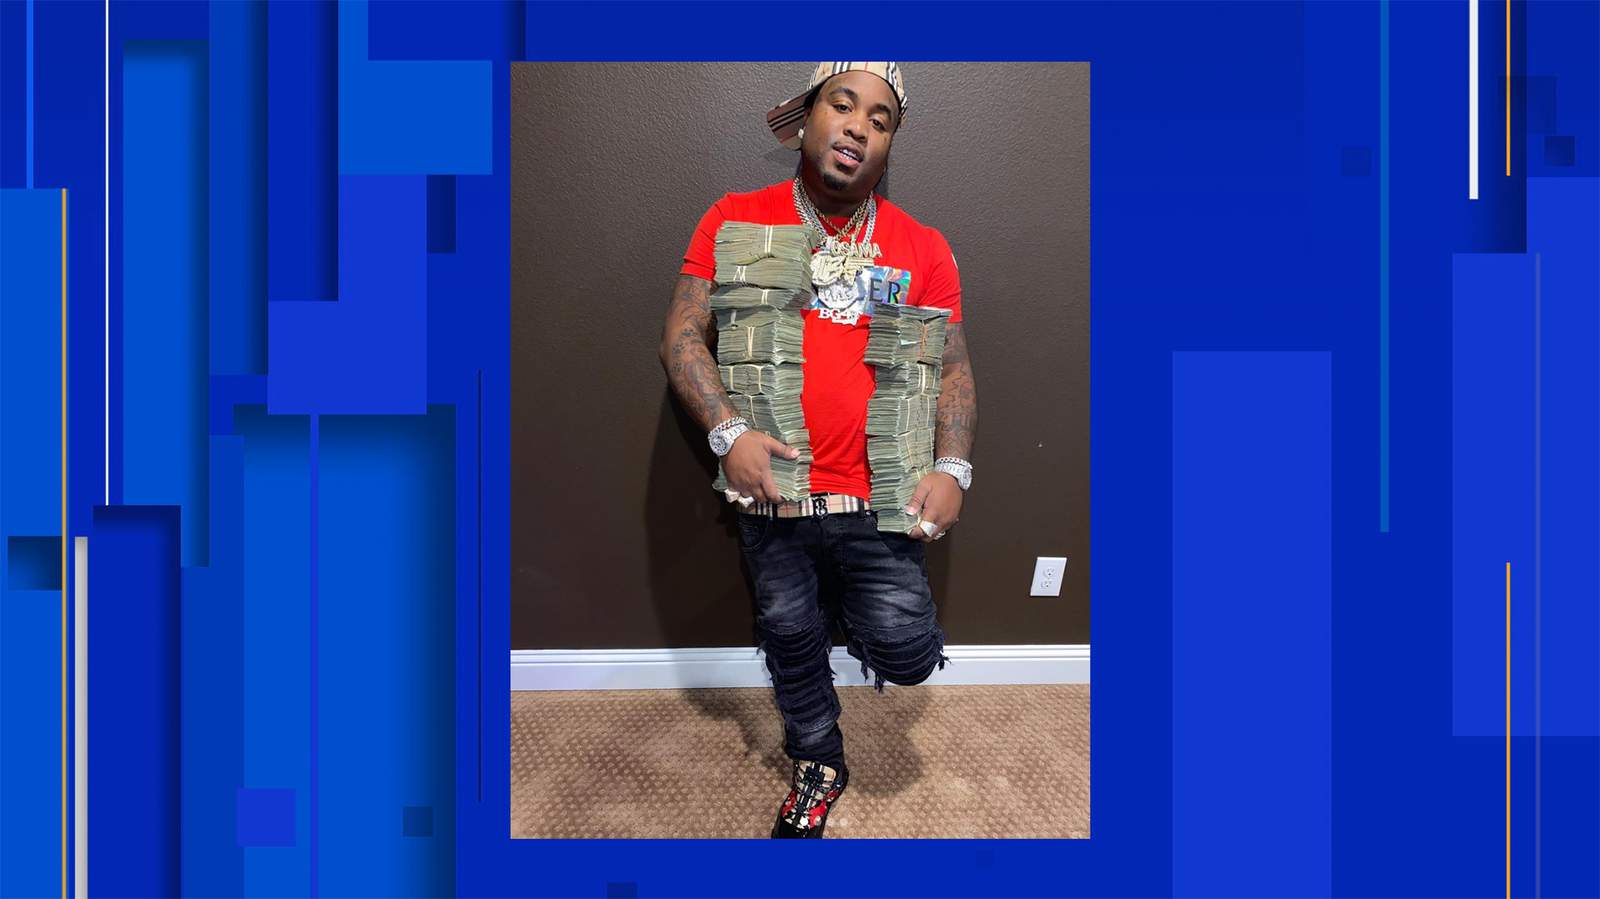 Dallas rapper Mo3 believed to have been killed in shooting on Dallas highway, reports say